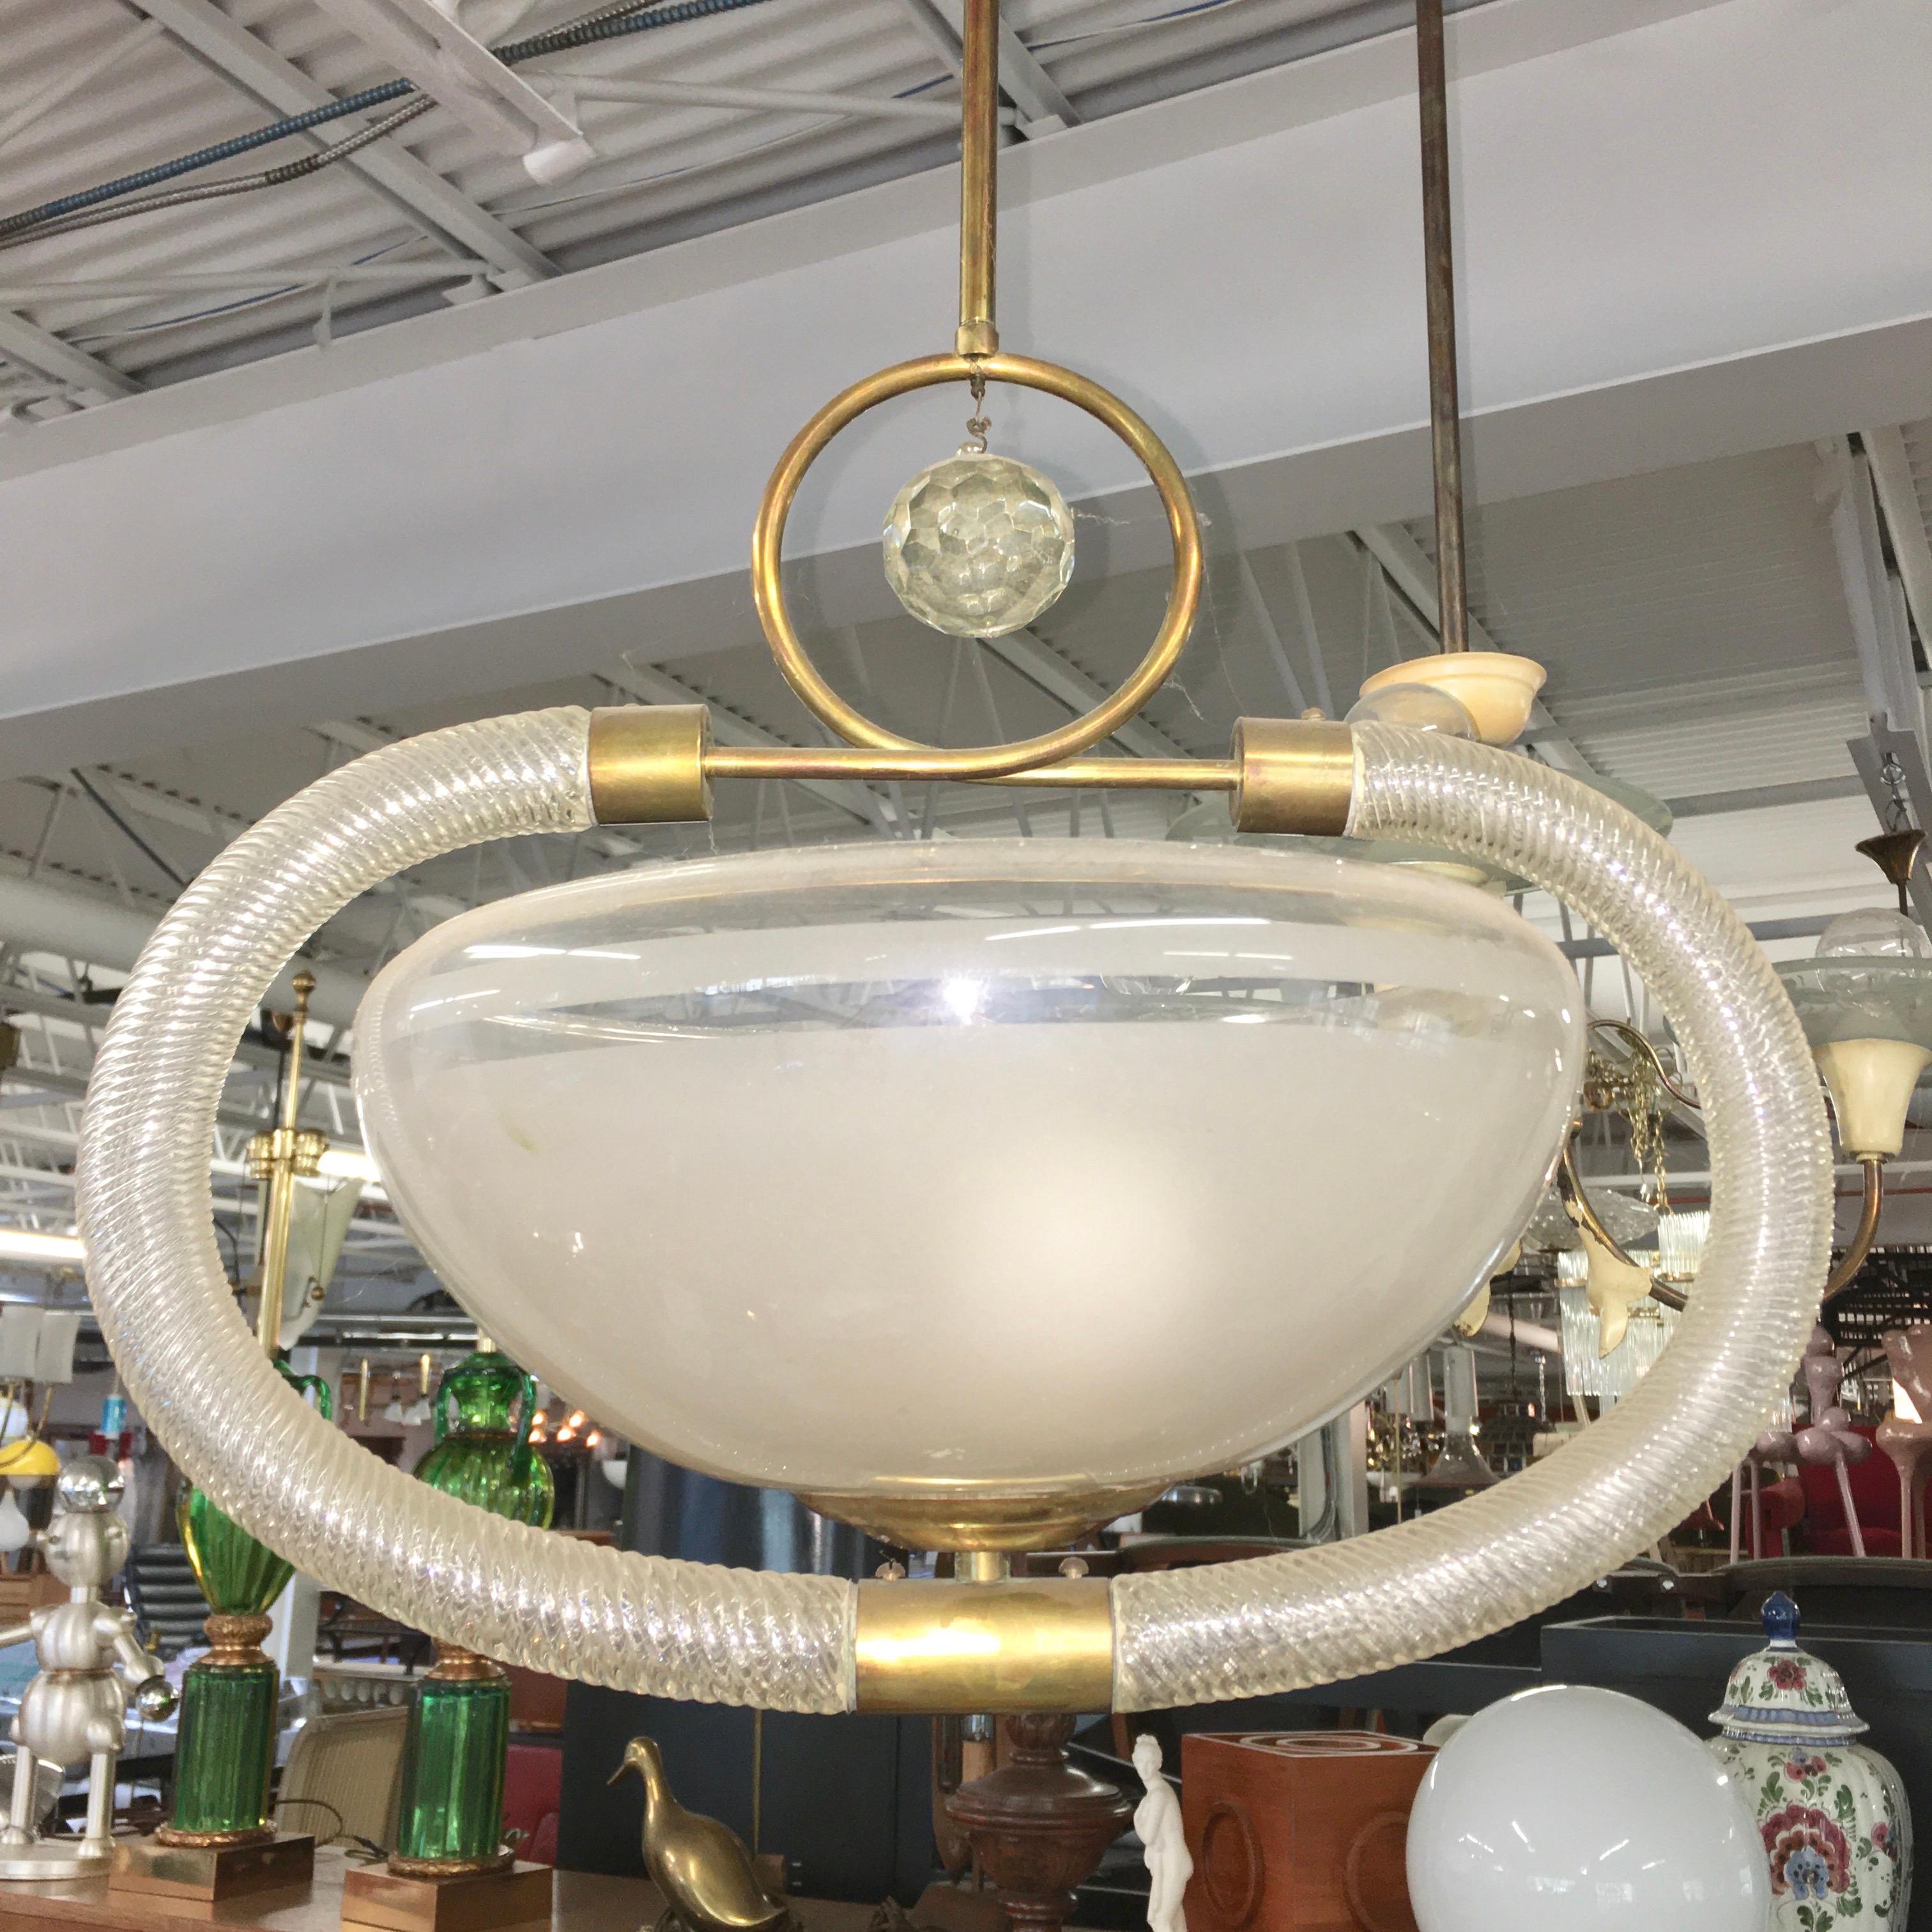 SATURDAY SALE

Gorgeous 1940's Barovier & Toso art deco pendant. All original in tact. Rewired. Takes two standard Edison screw lightbulbs. We can lengthen or shorten the brass stem.